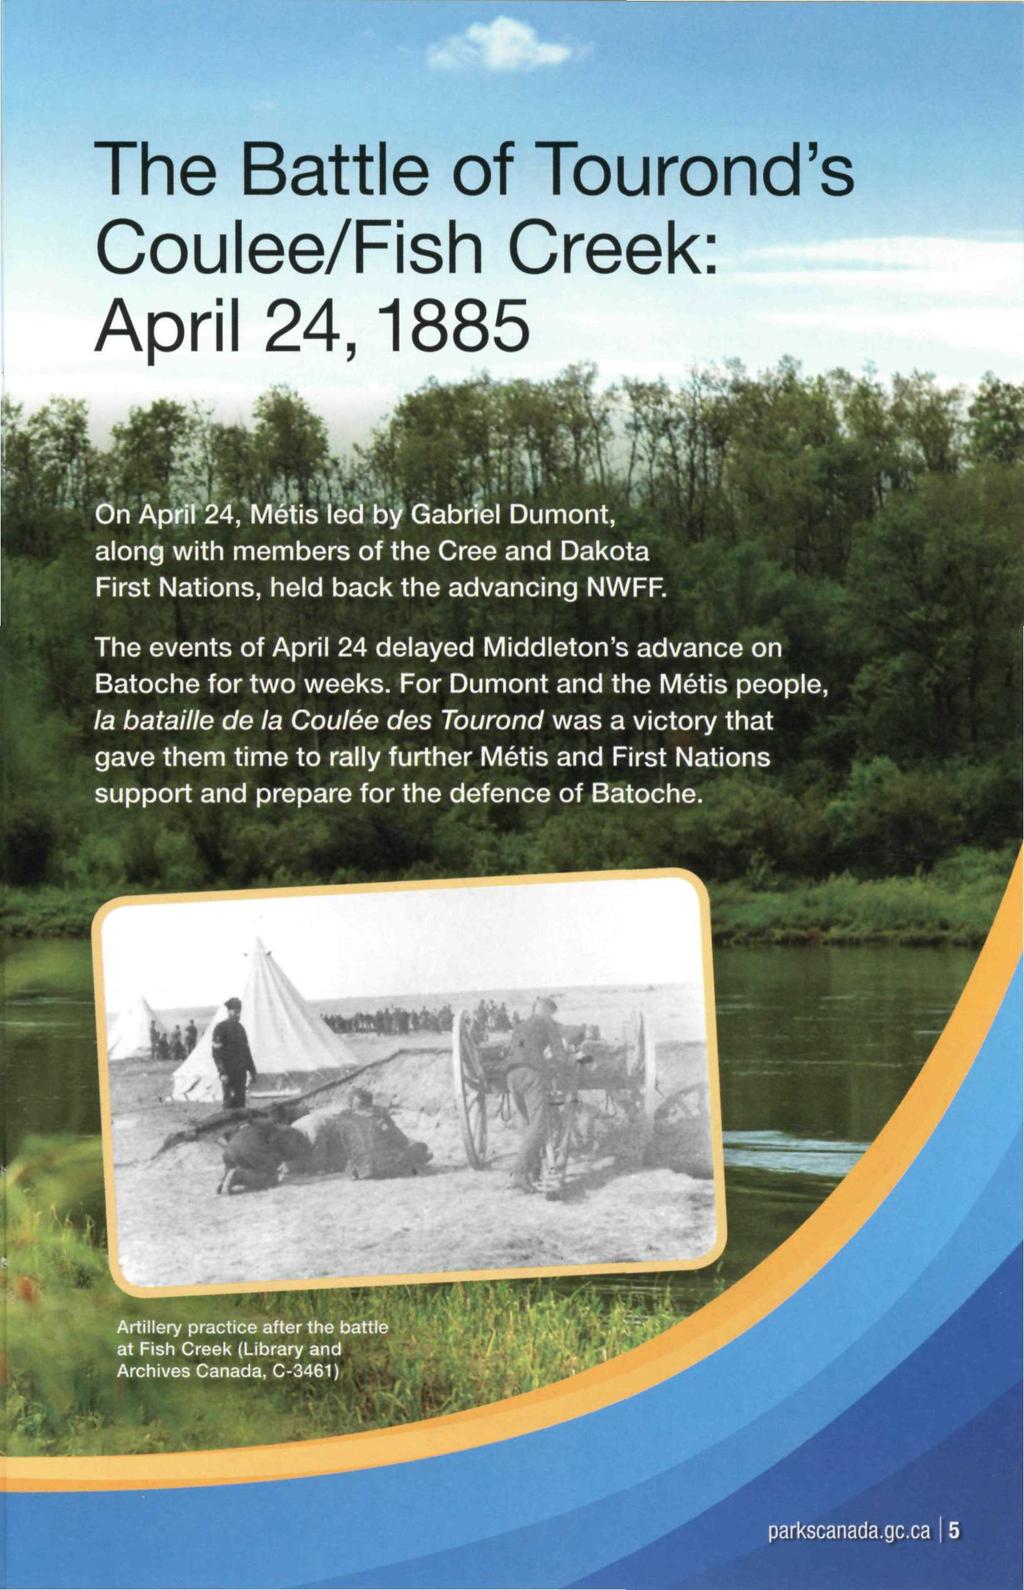 The Battle of Tourond's Coulee/Fish Creek: April 24,1885 On April 24, Métis led by Gabriel Dumont, along with members of the Crée and Dakota First Nations, held back the advancing NWFF.